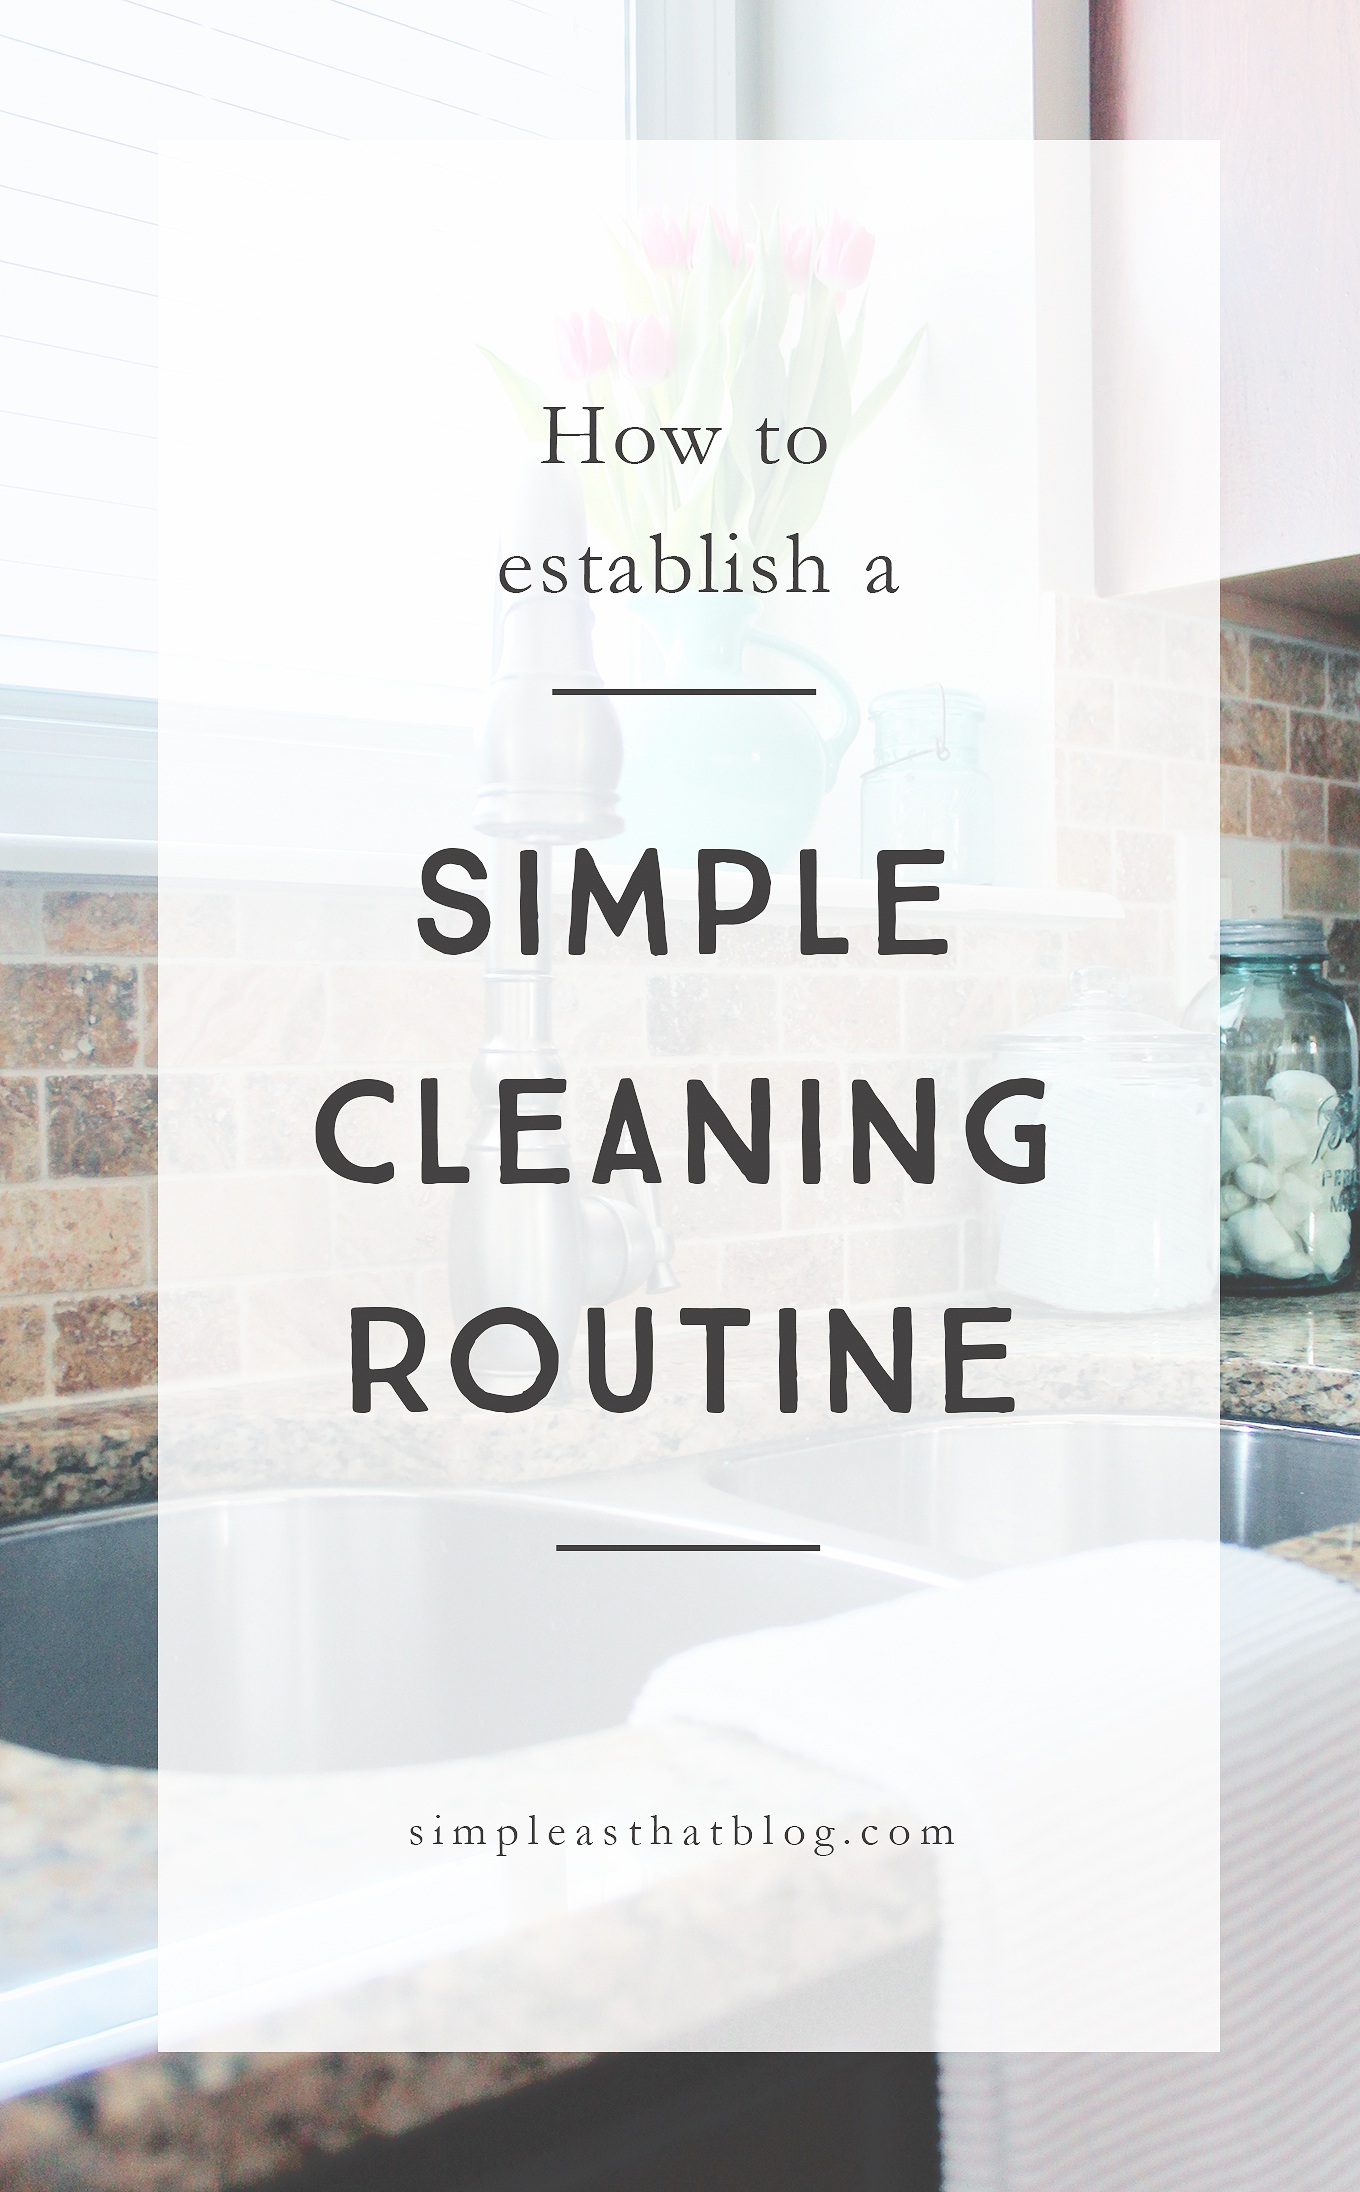 Feeling overwhelmed with a messy house, a cluttered room, or an out of control paper pile? Learn how to establish a Simple cleaning routine!